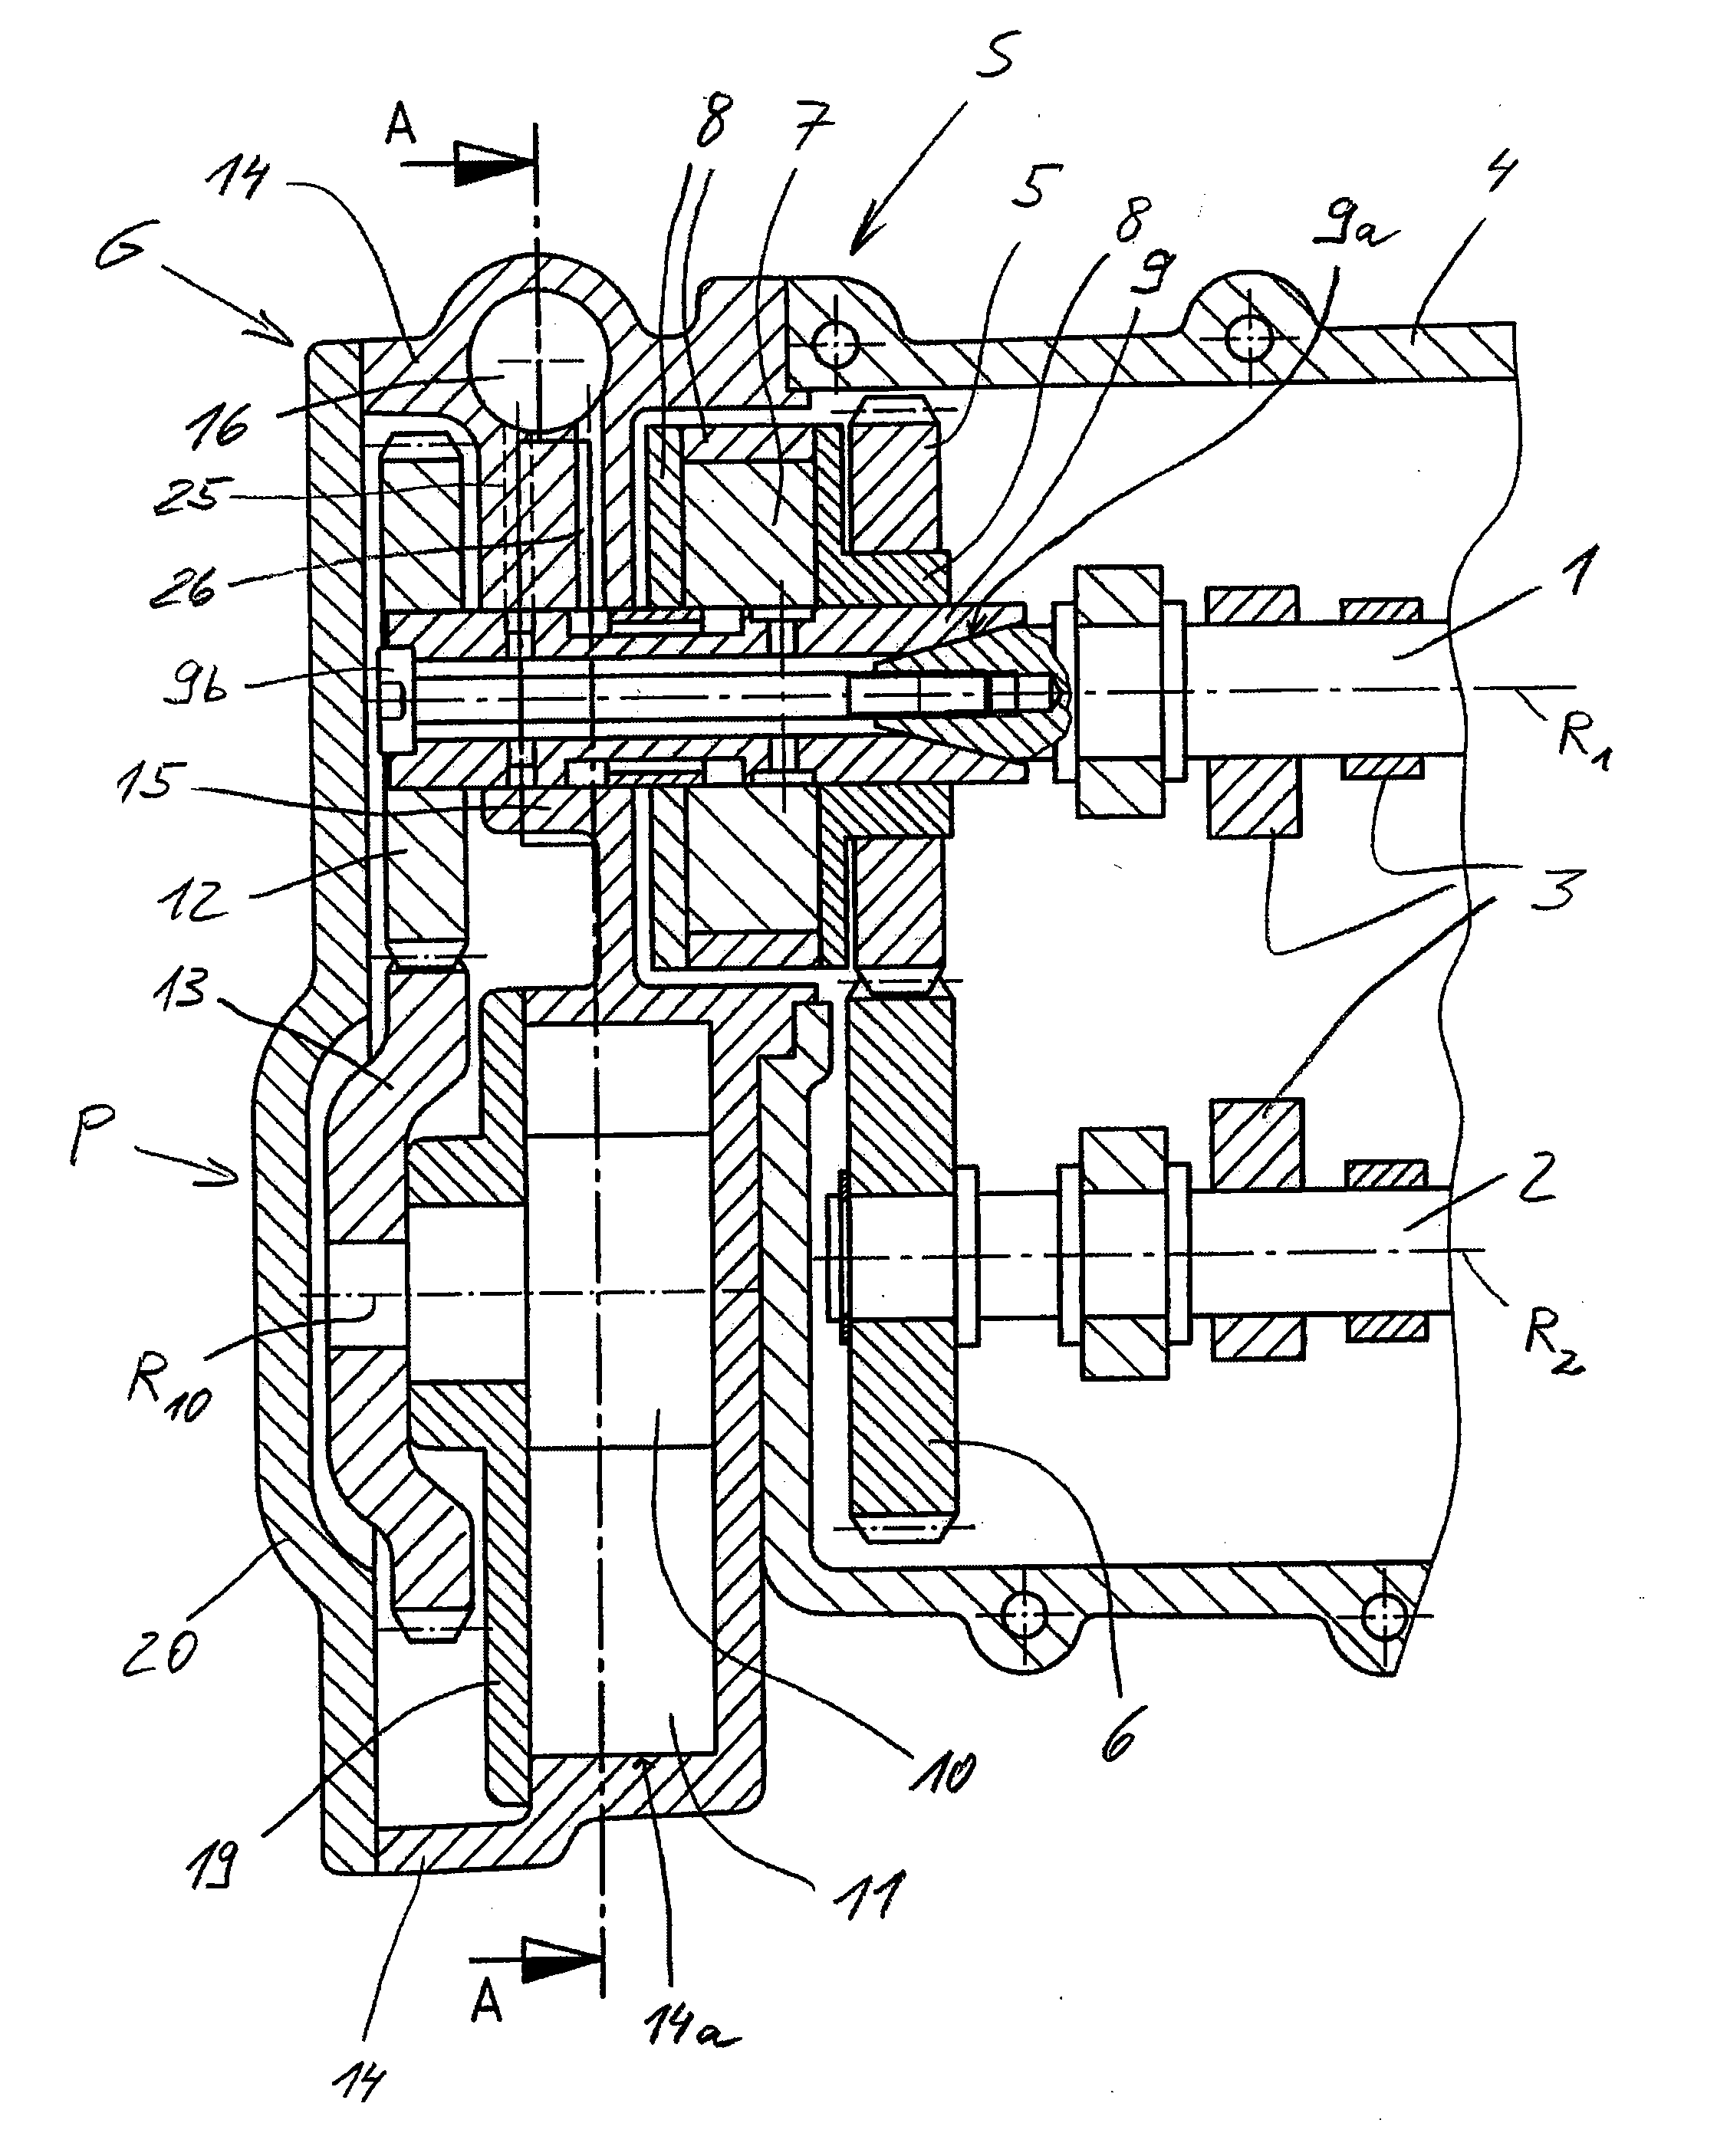 Cam shaft phase setter and vacuum pump for an internal combustion engine